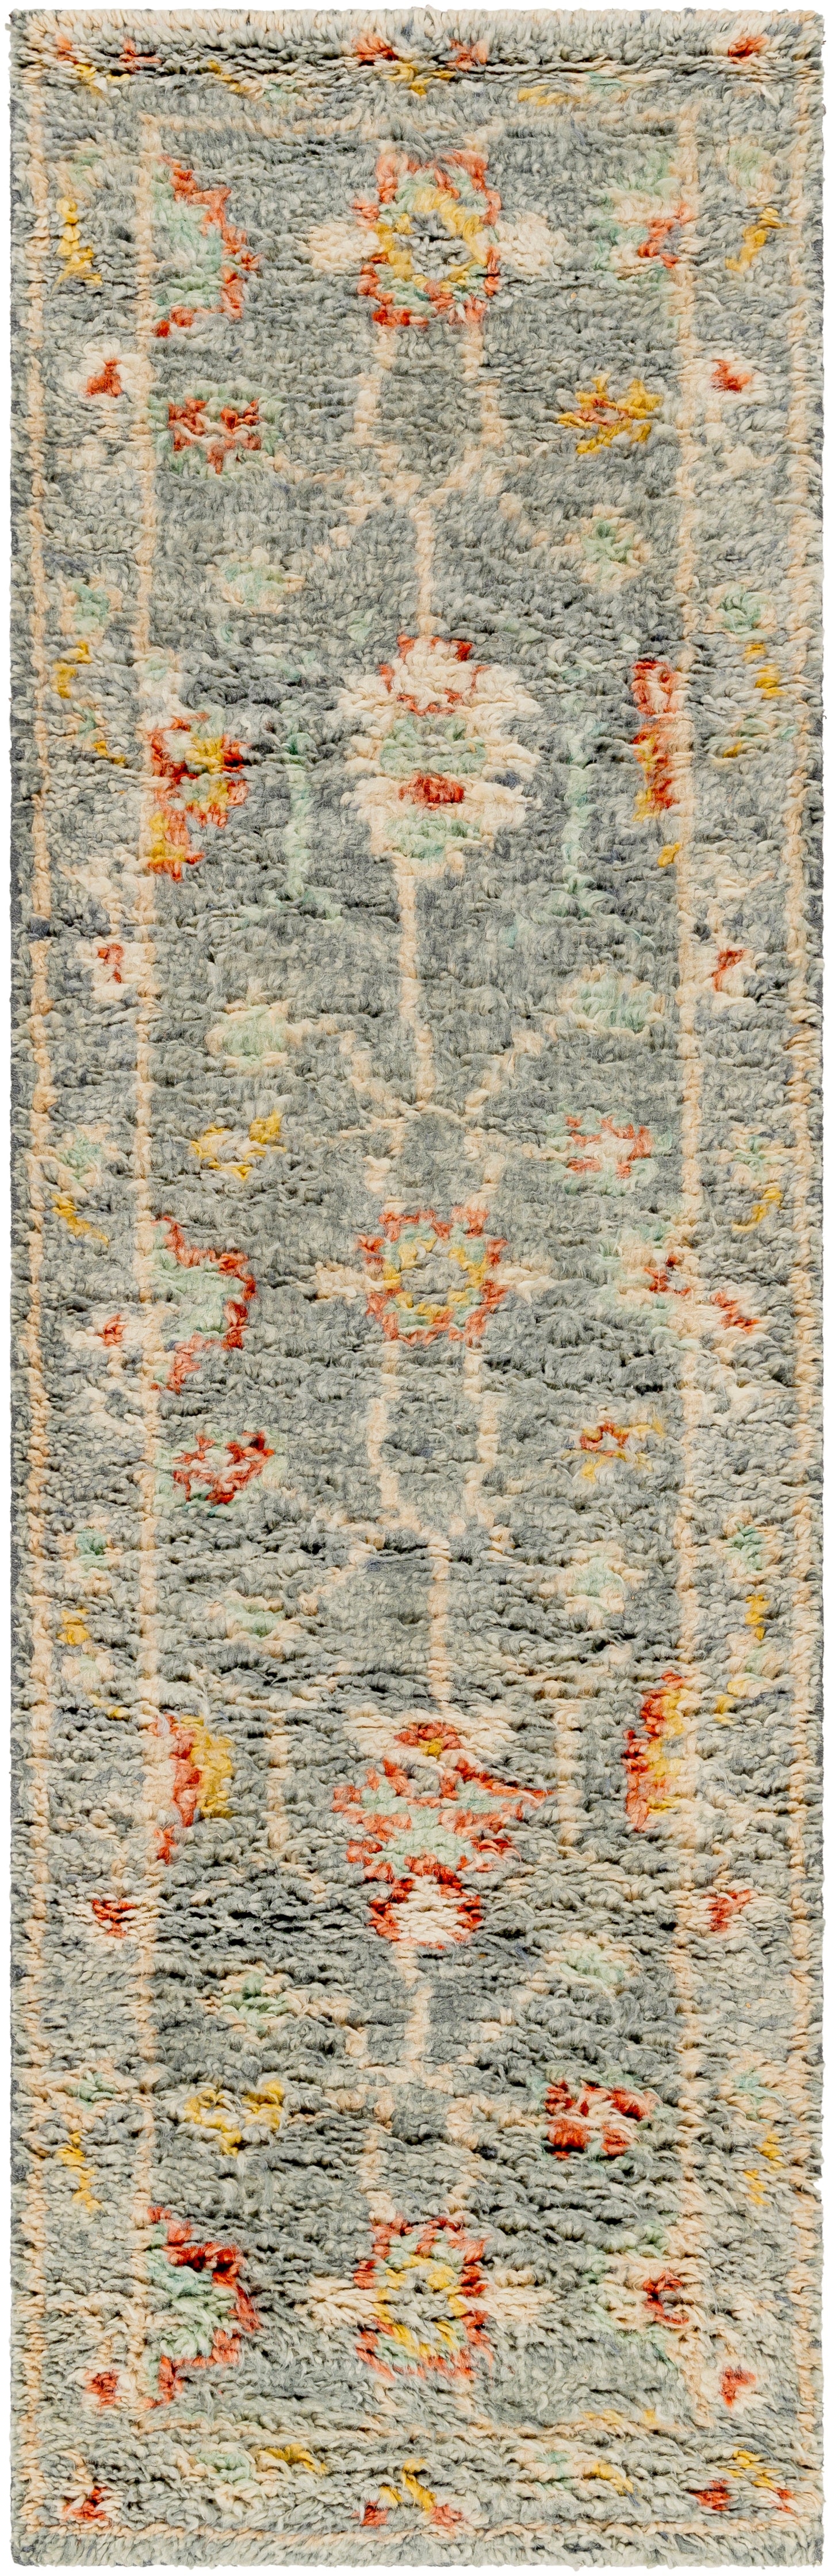 Marrakech 29603 Hand Knotted Wool Indoor Area Rug by Surya Rugs